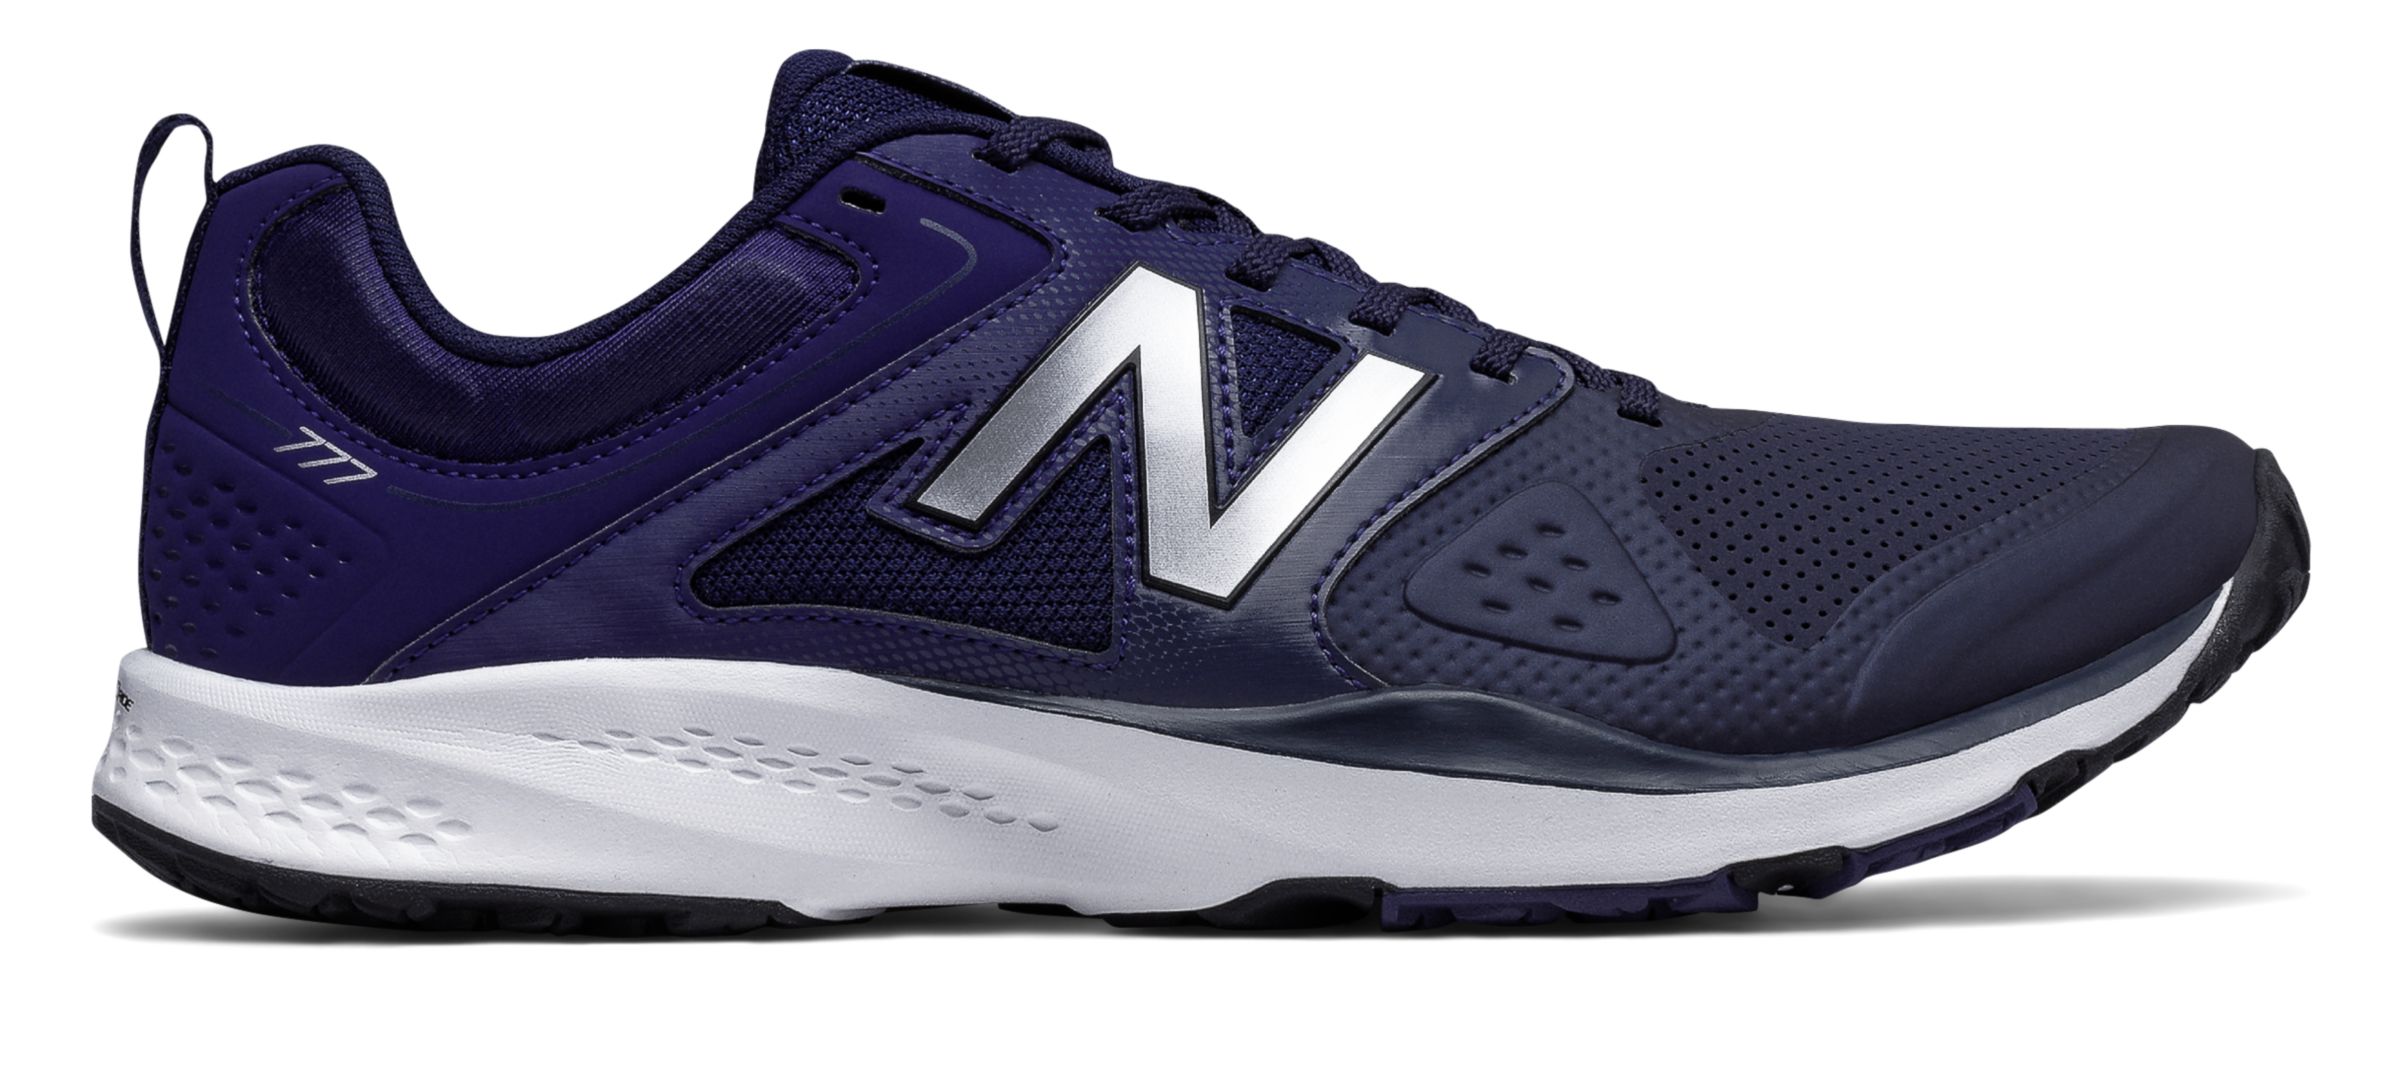 New Balance MX777-V2 on Sale - Discounts Up to 32% Off on MX777BB at Joe's New  Balance Outlet